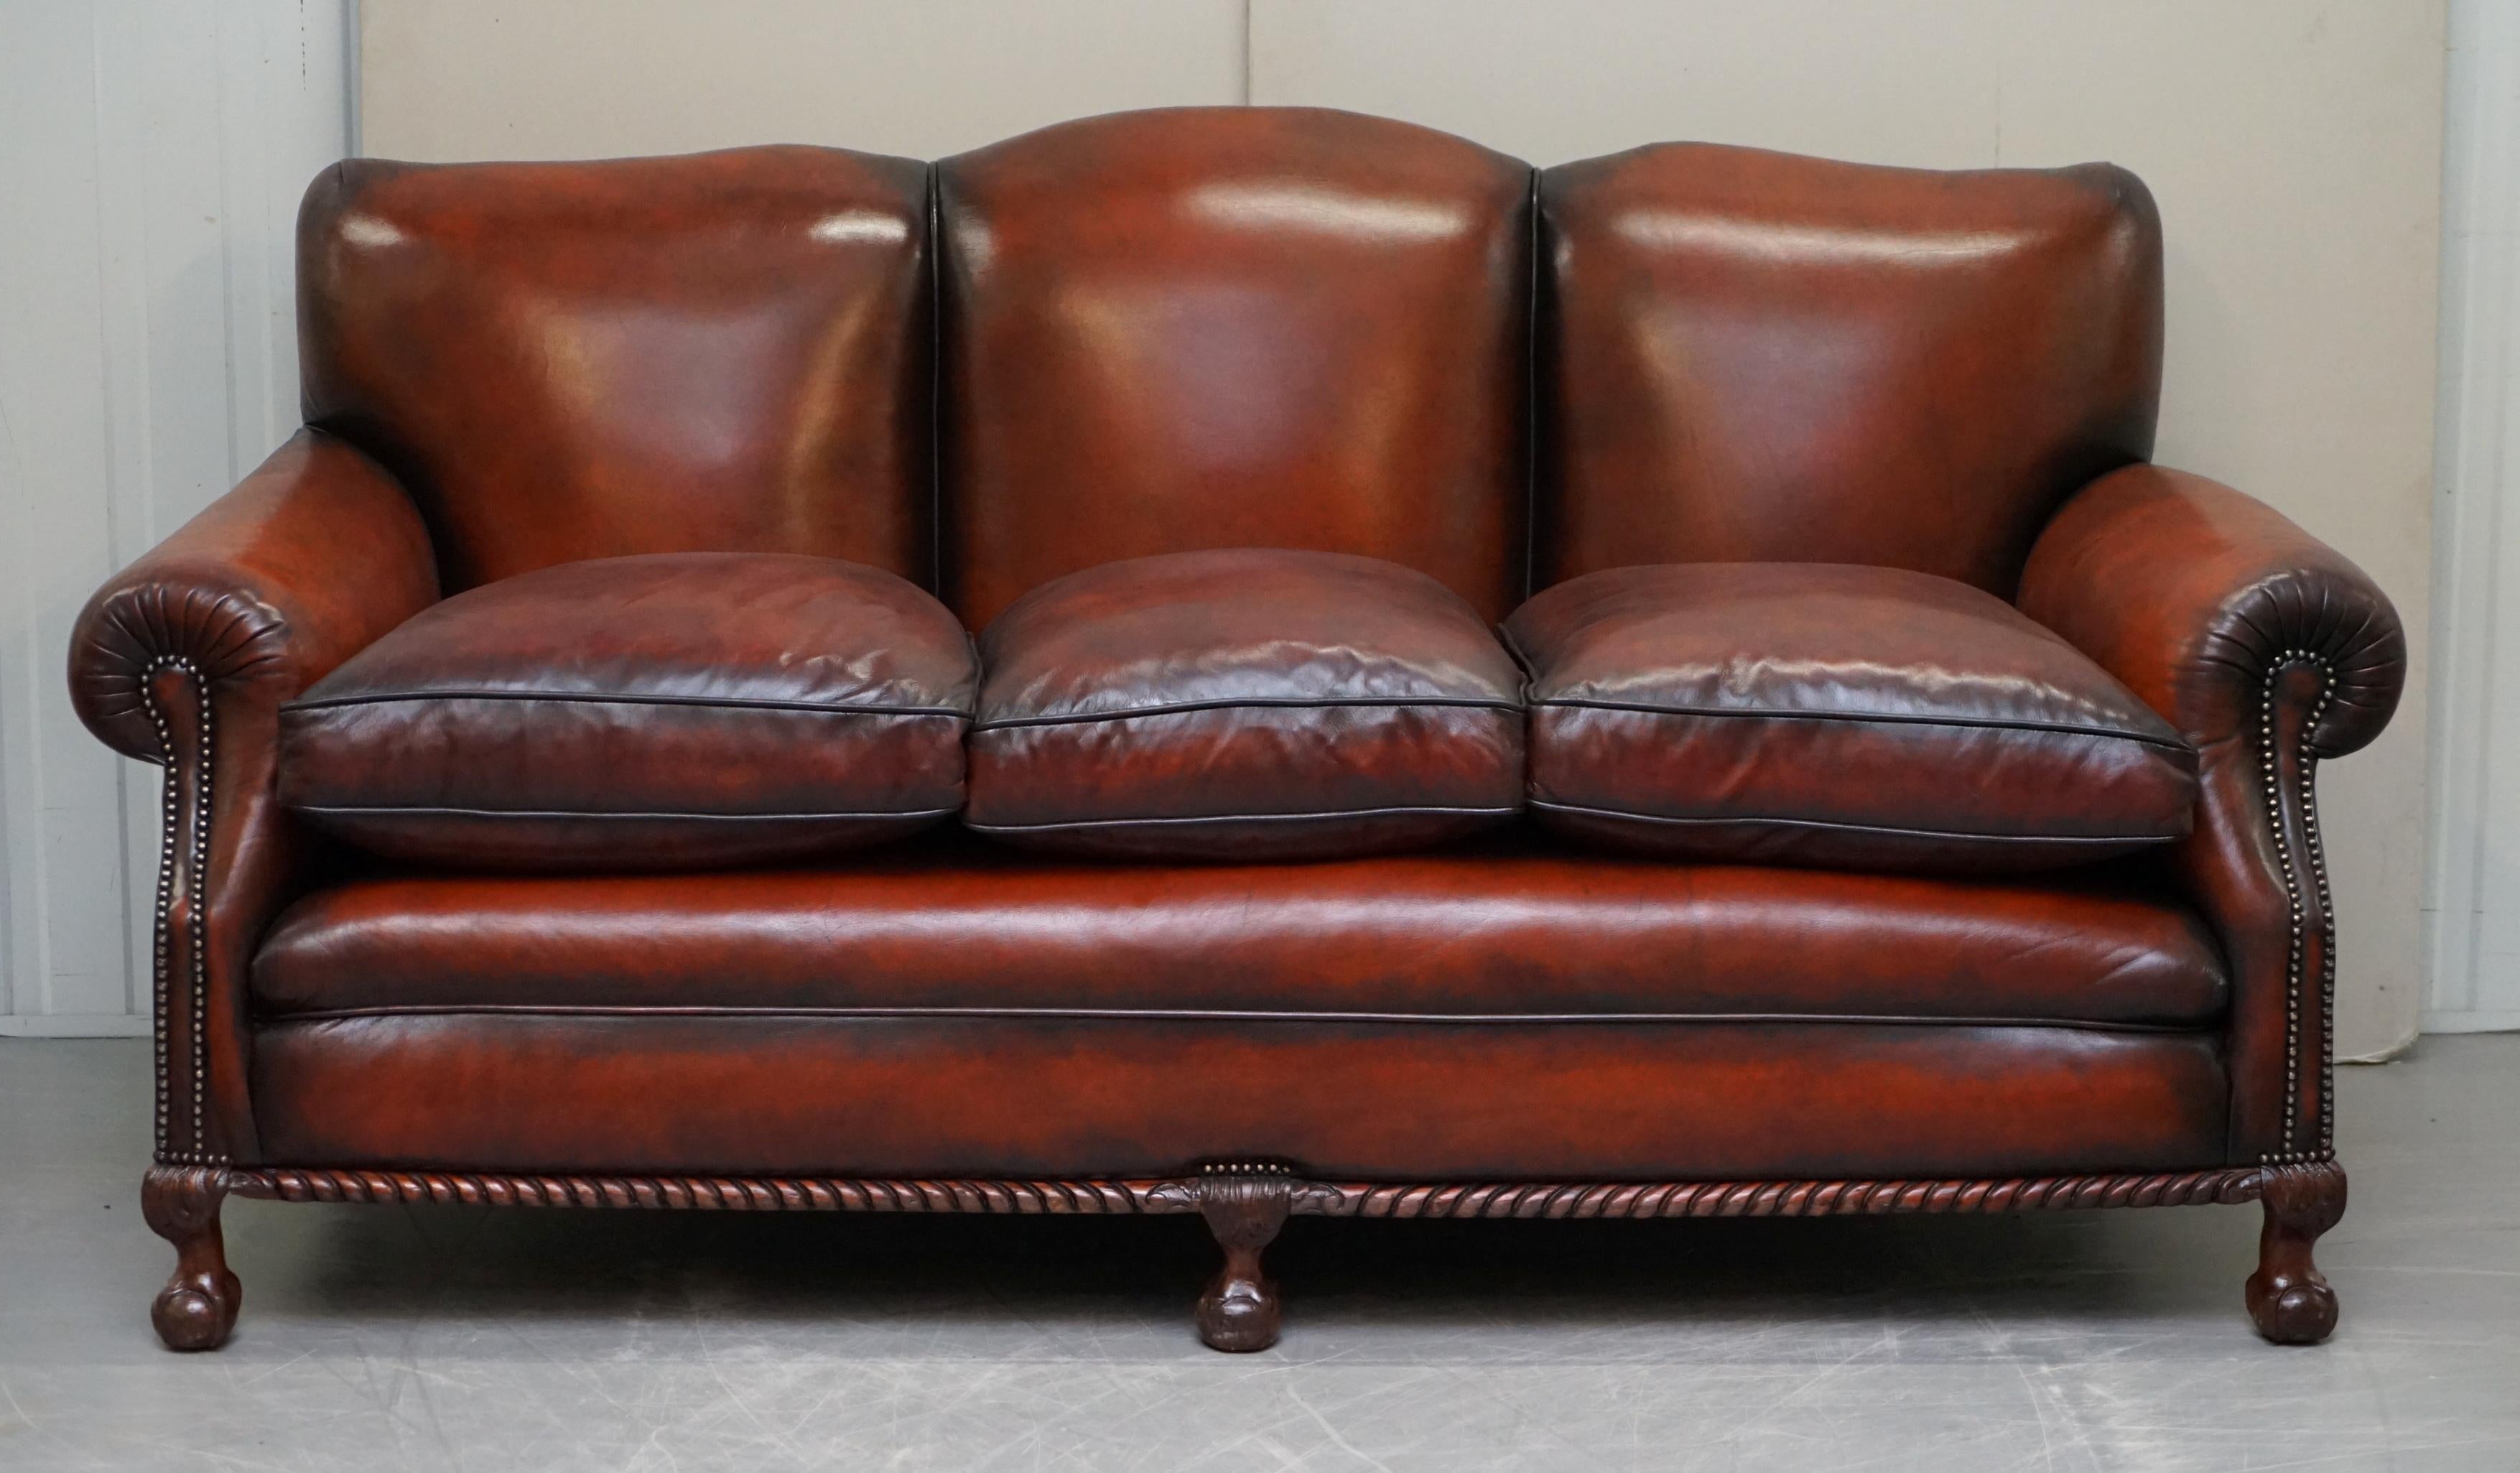 We are delighted to this stunning fully restored late Victorian club sofa with Thomas Chippendale style claw & ball feet

A truly remarkable find, I have only ever seen one or two early club sofas with the Chippendale style legs and never in this